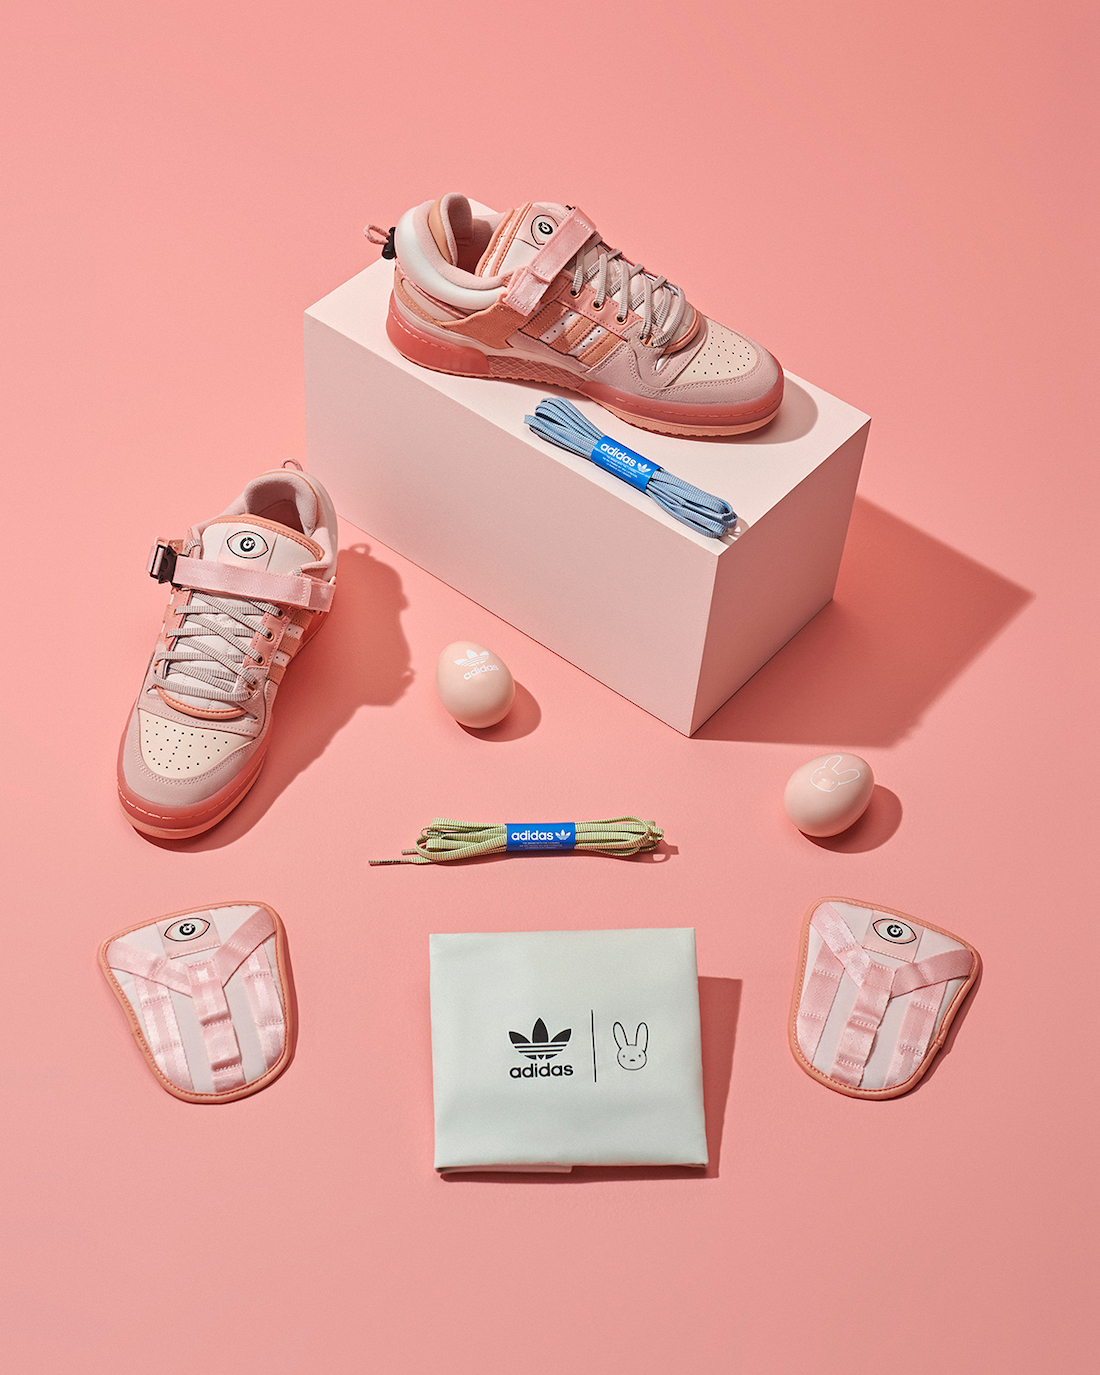 Bad-Bunny-adidas-Forum-Buckle-Low-Easter-Egg-GW0265-Release-Date-2